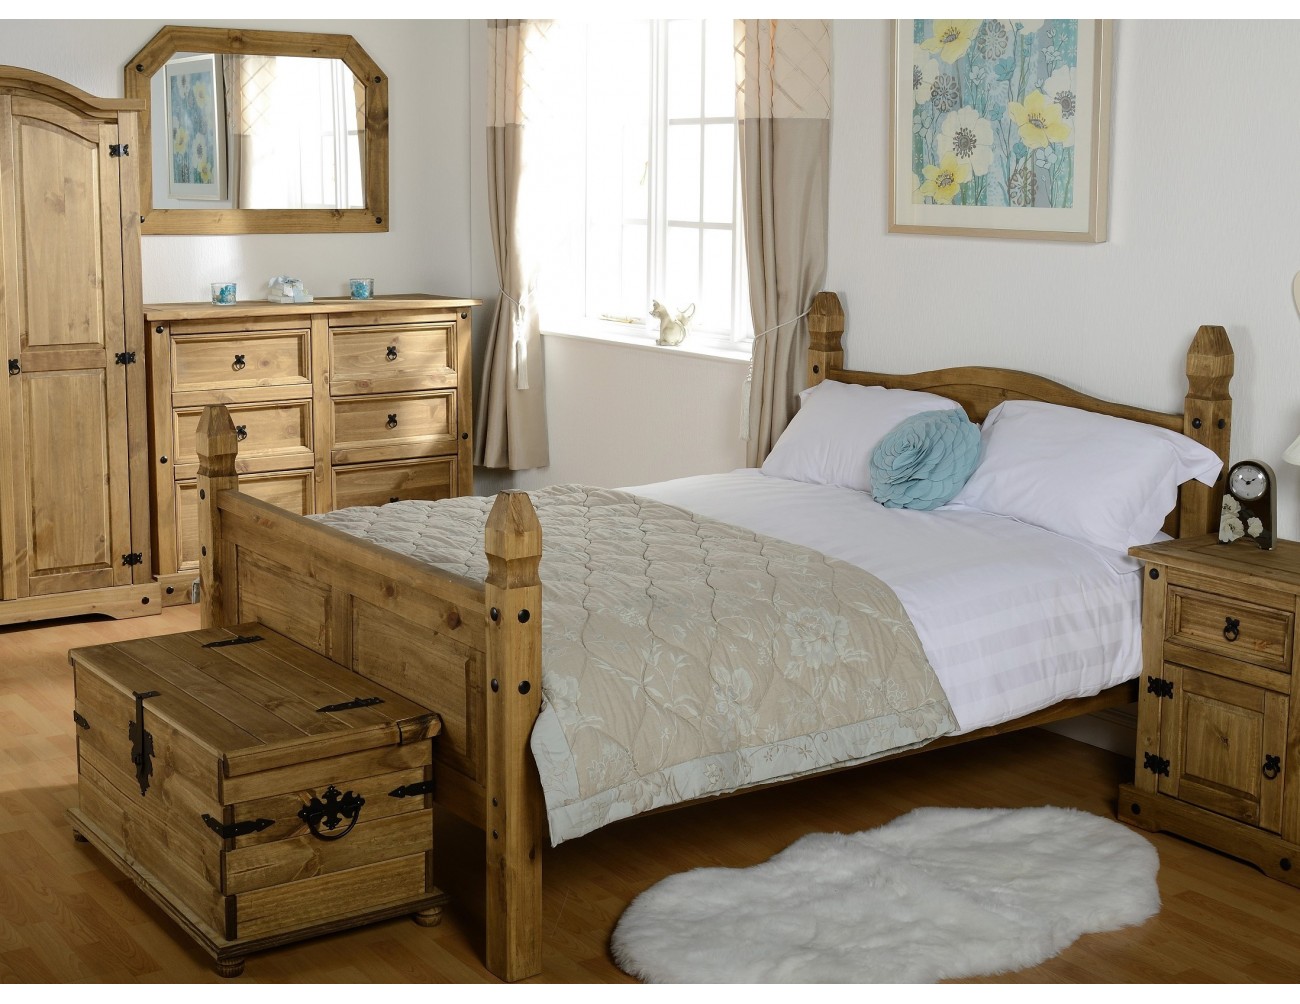 Bedside Tables and Cabinets - J&B Furniture